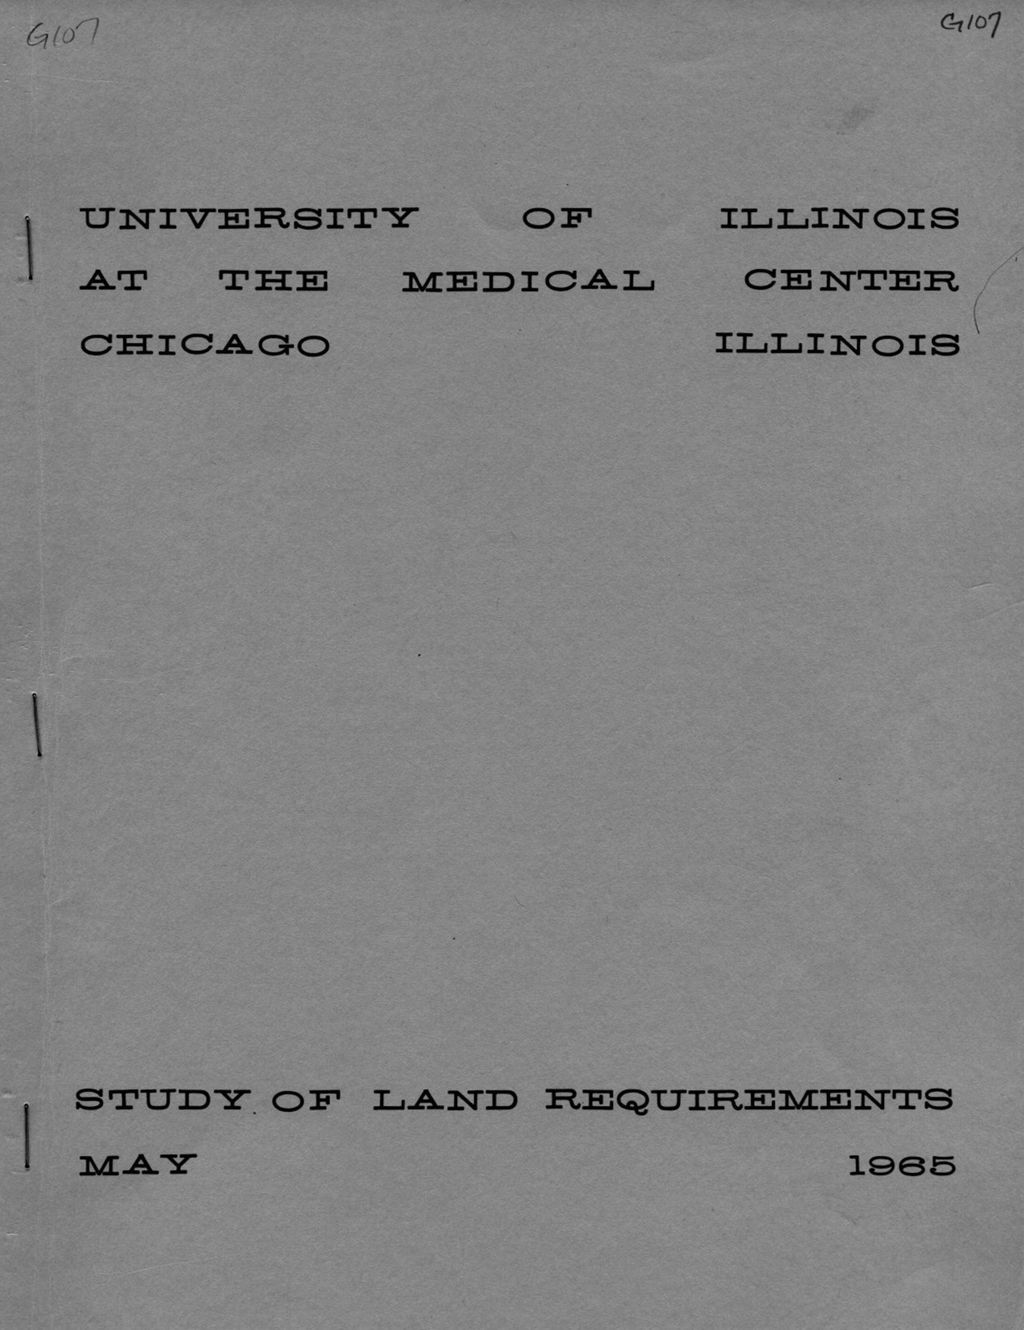 Miniature of Study of Land Requirements, University of Illinois at the Medical Center